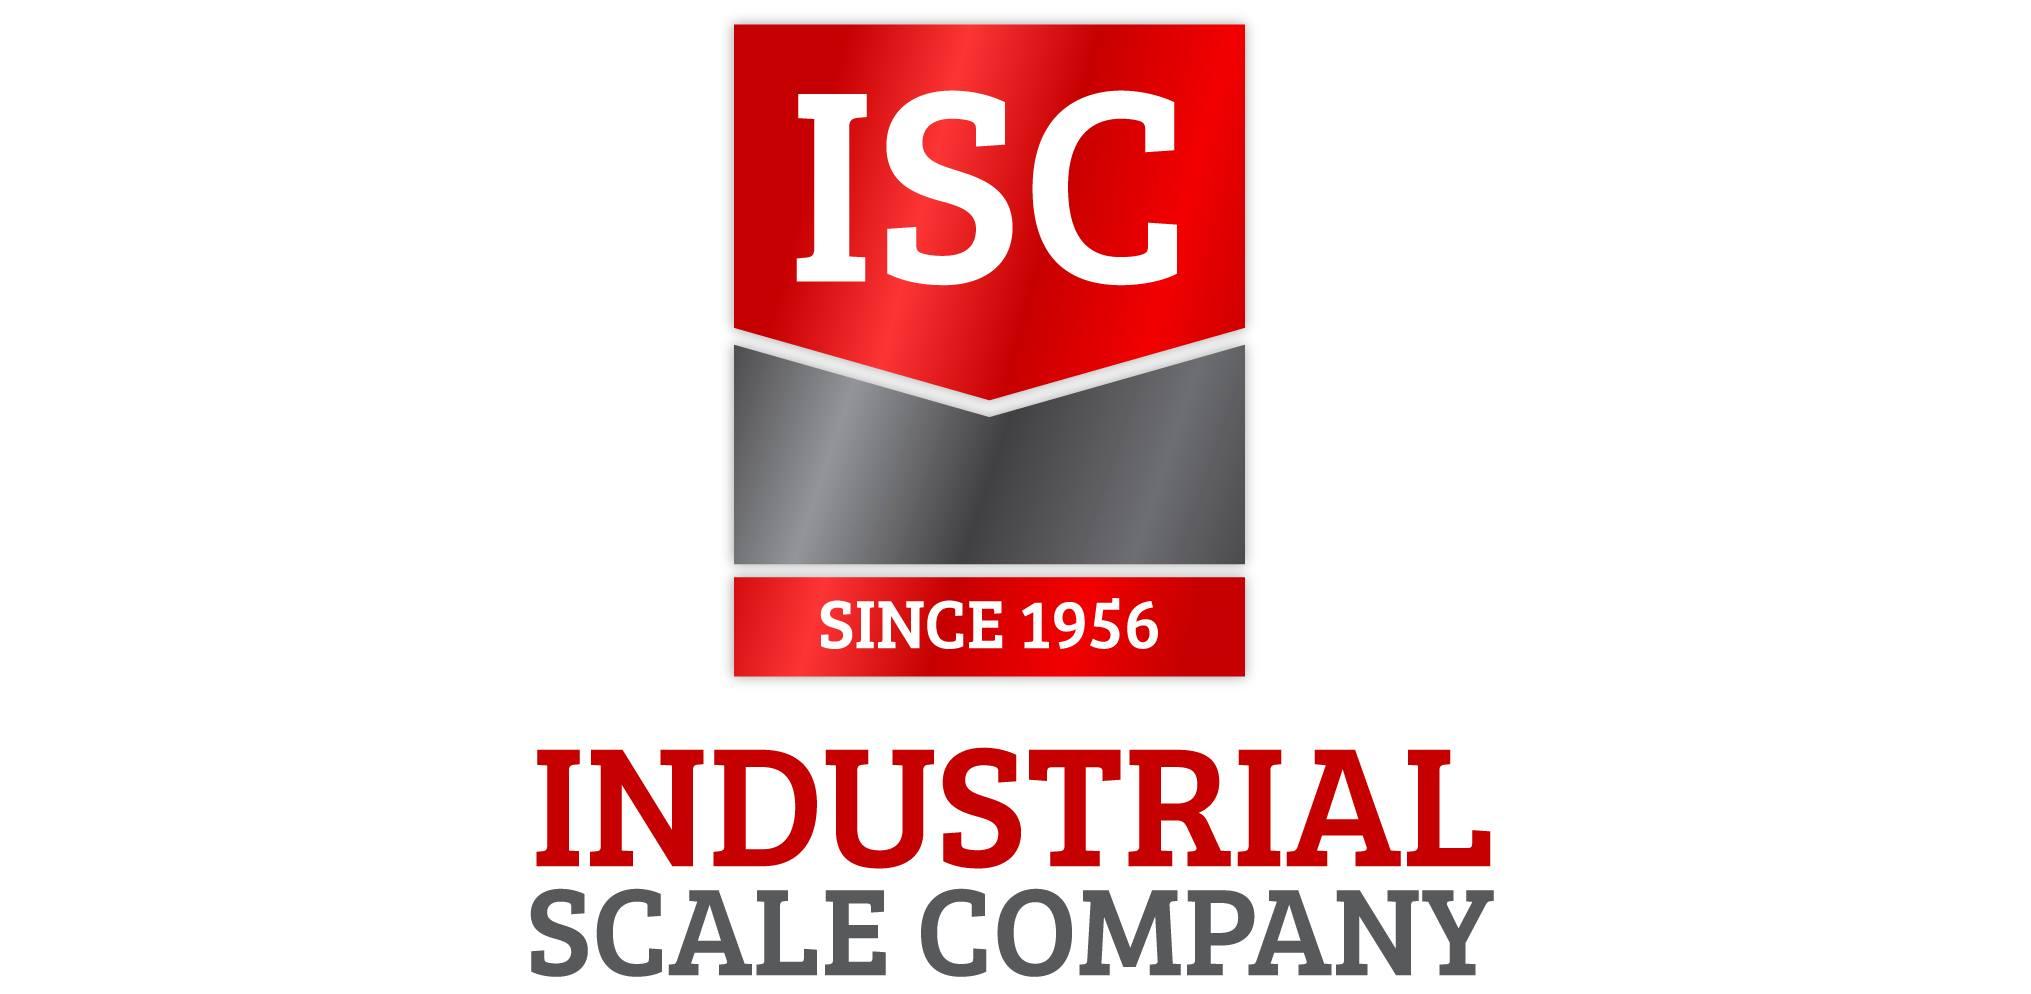 Industrialscale